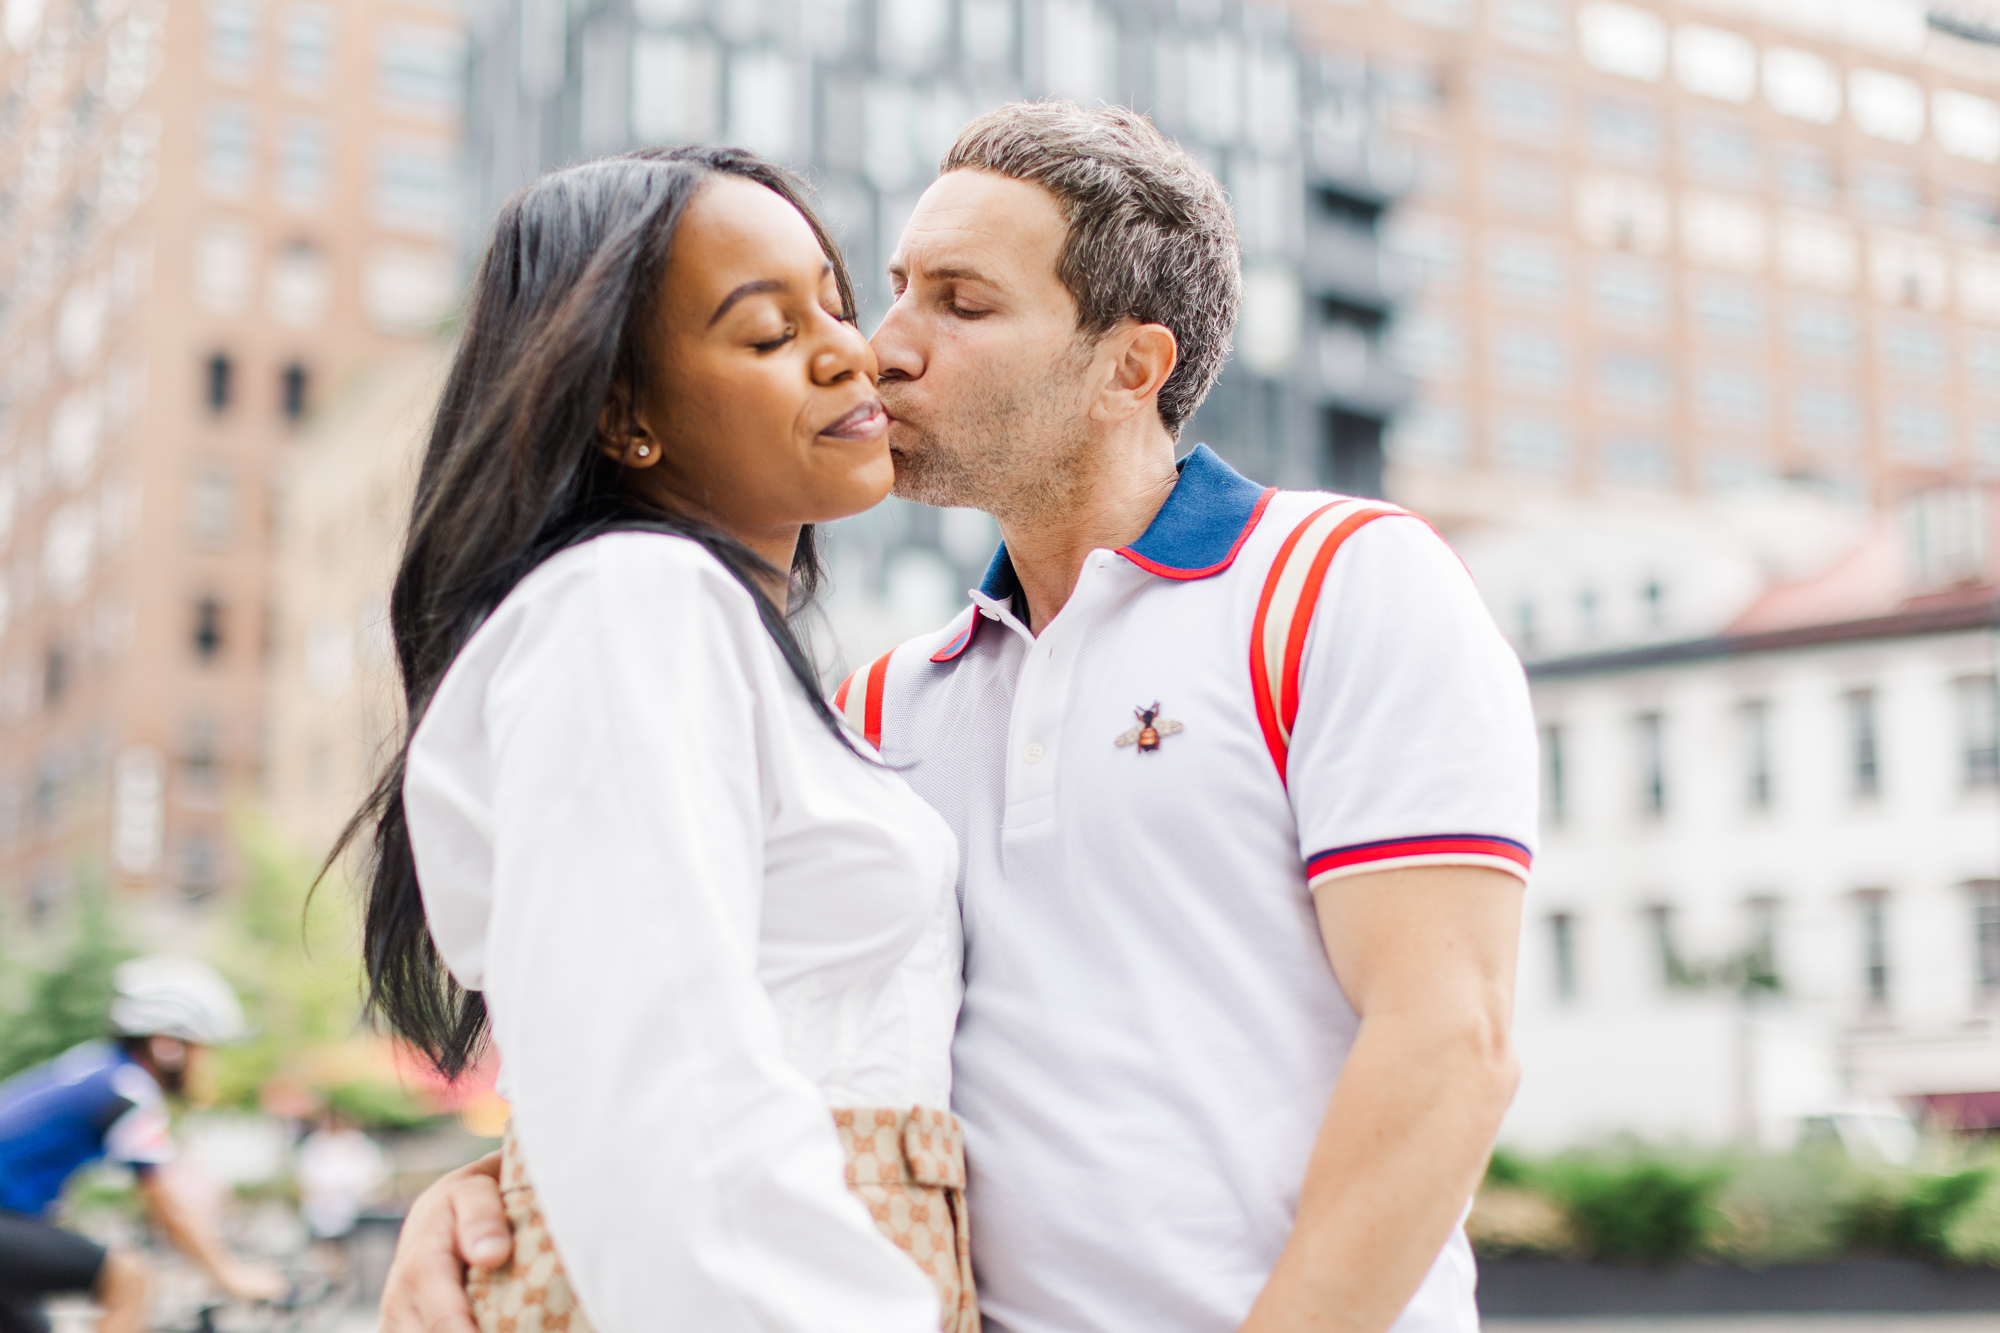 Dazzling Meatpacking District Engagement Photos